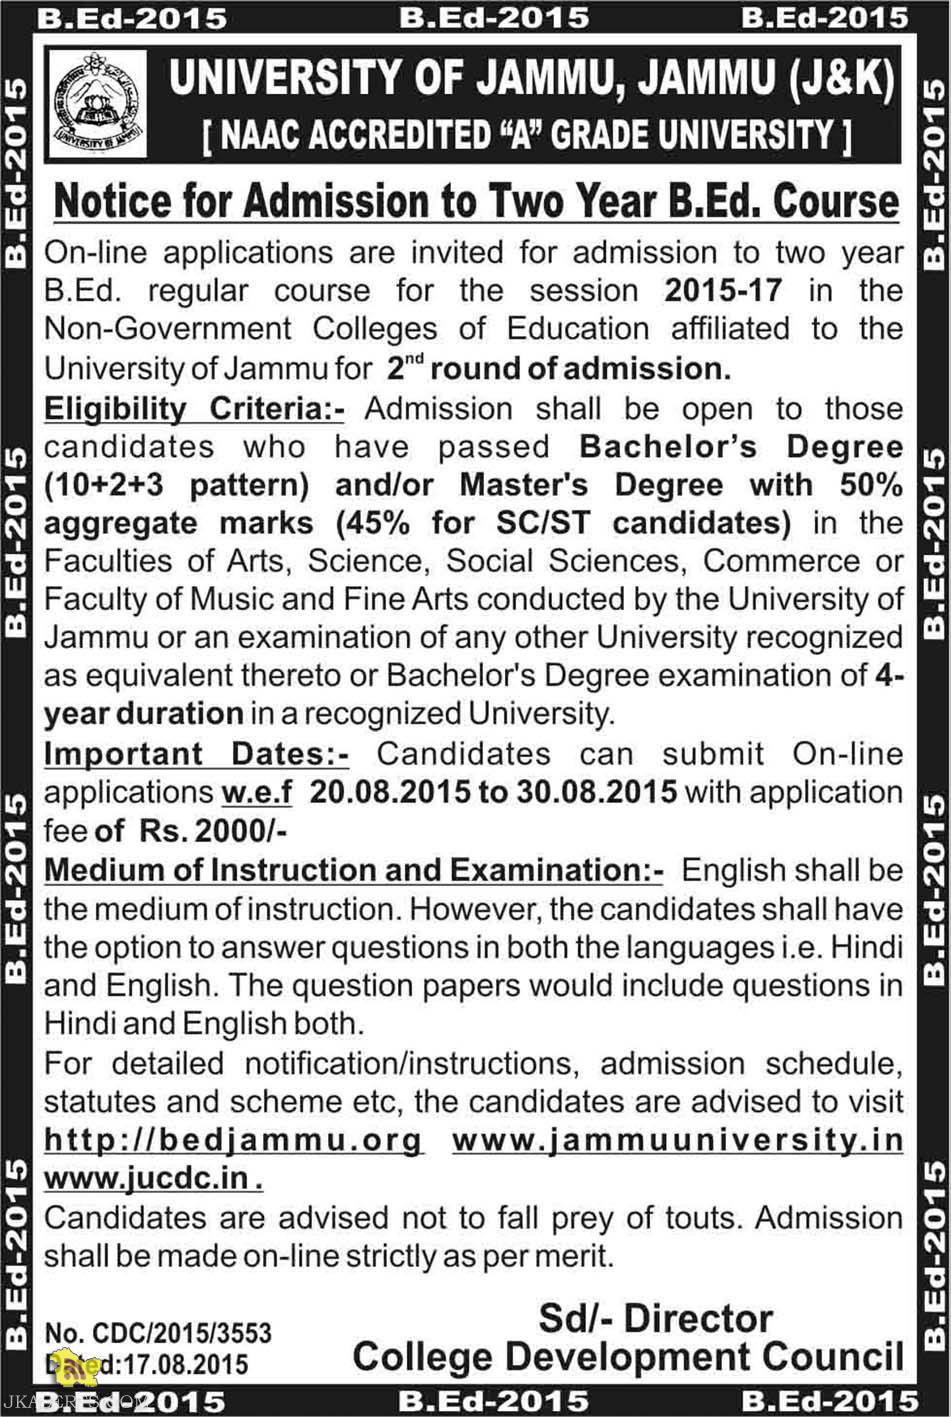 Admission to Two Year B.Ed. Course in University of Jammu